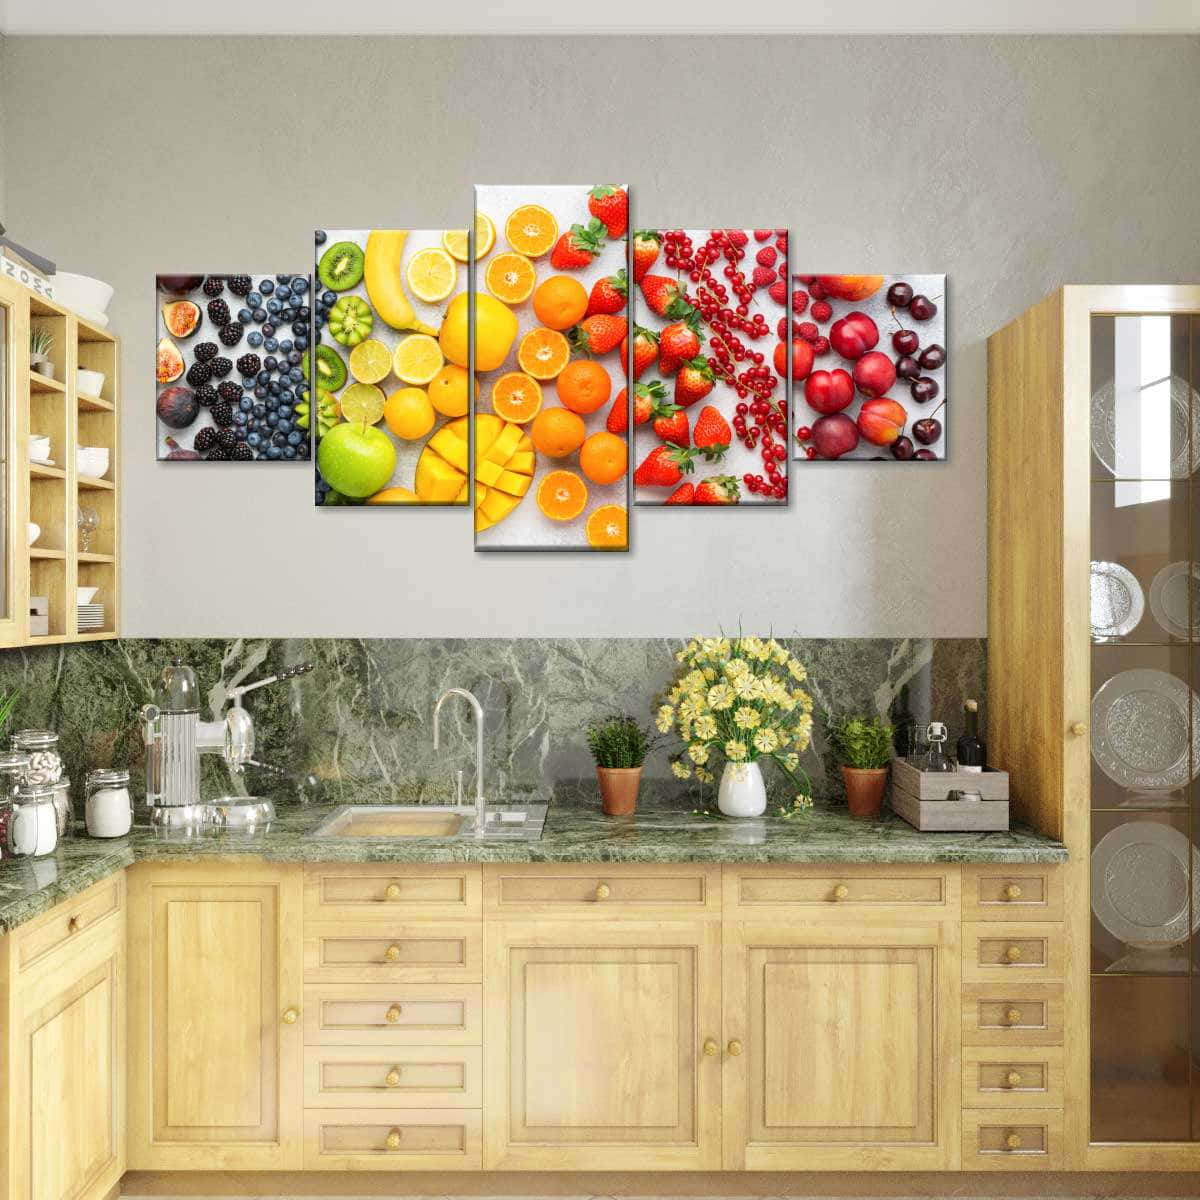 Download A Kitchen With A Lot Of Fruit On The Counter | Wallpapers.com